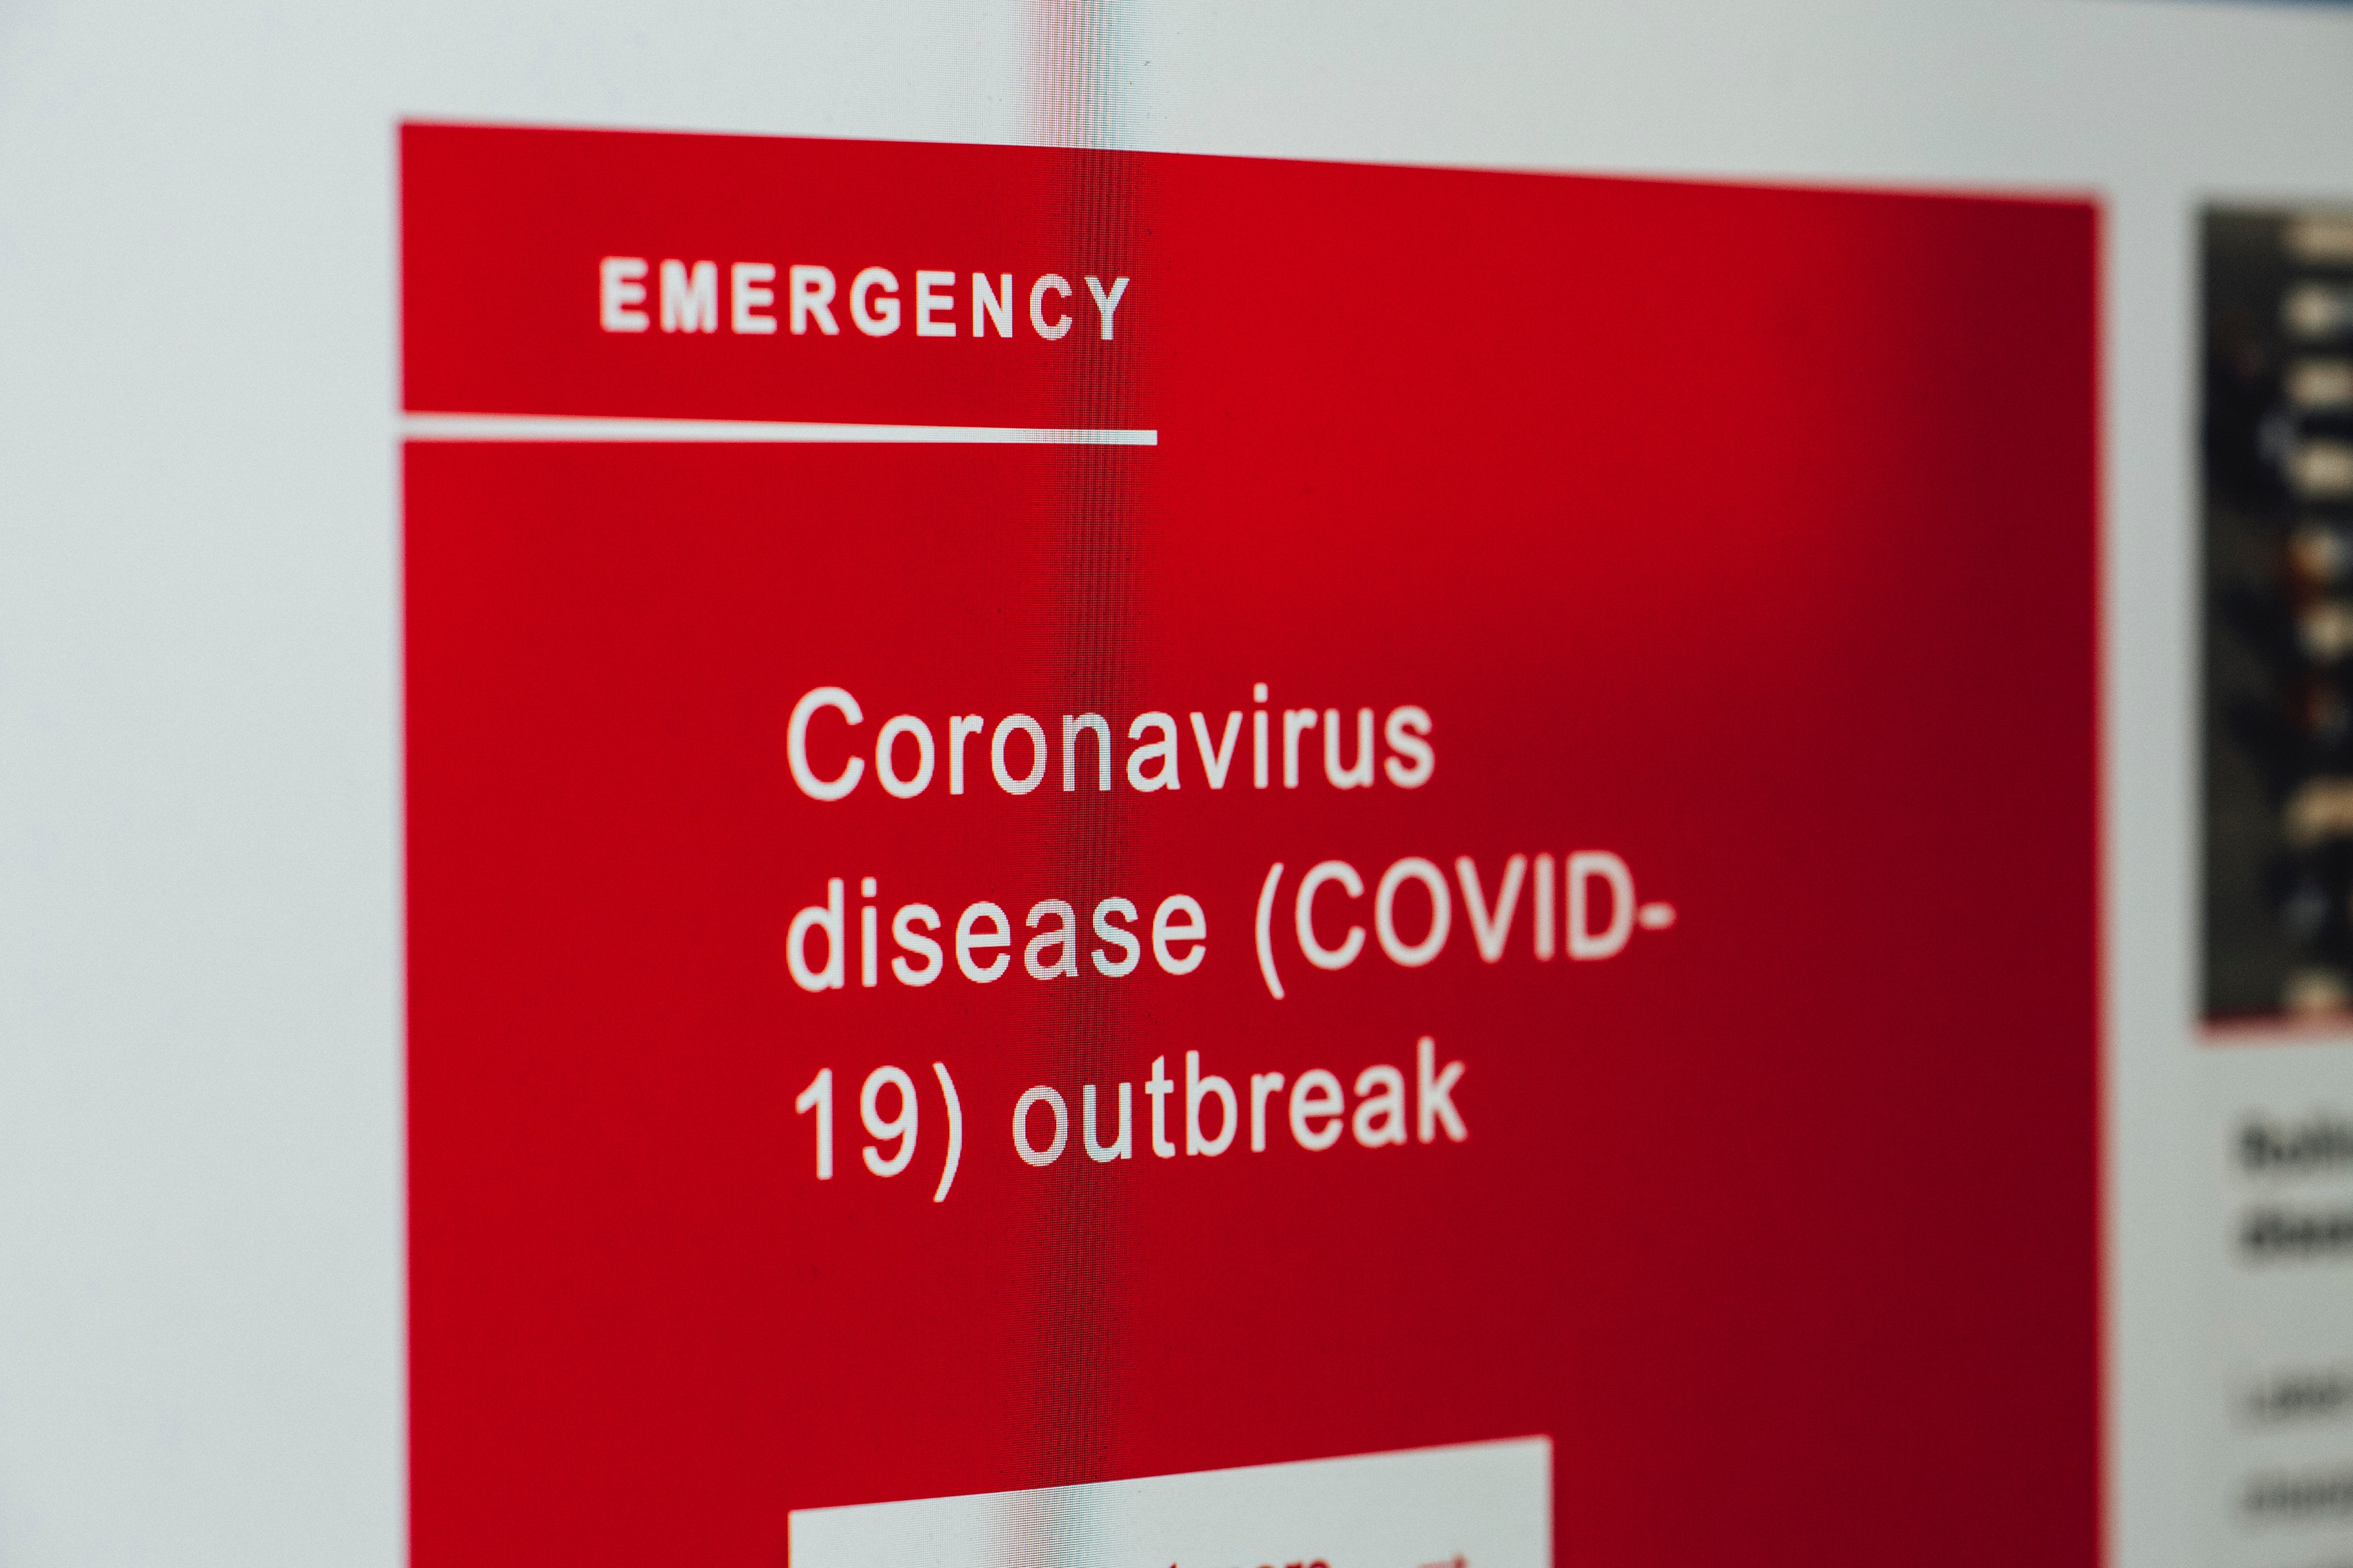 COVID-19: The Current IP Behind the Disease